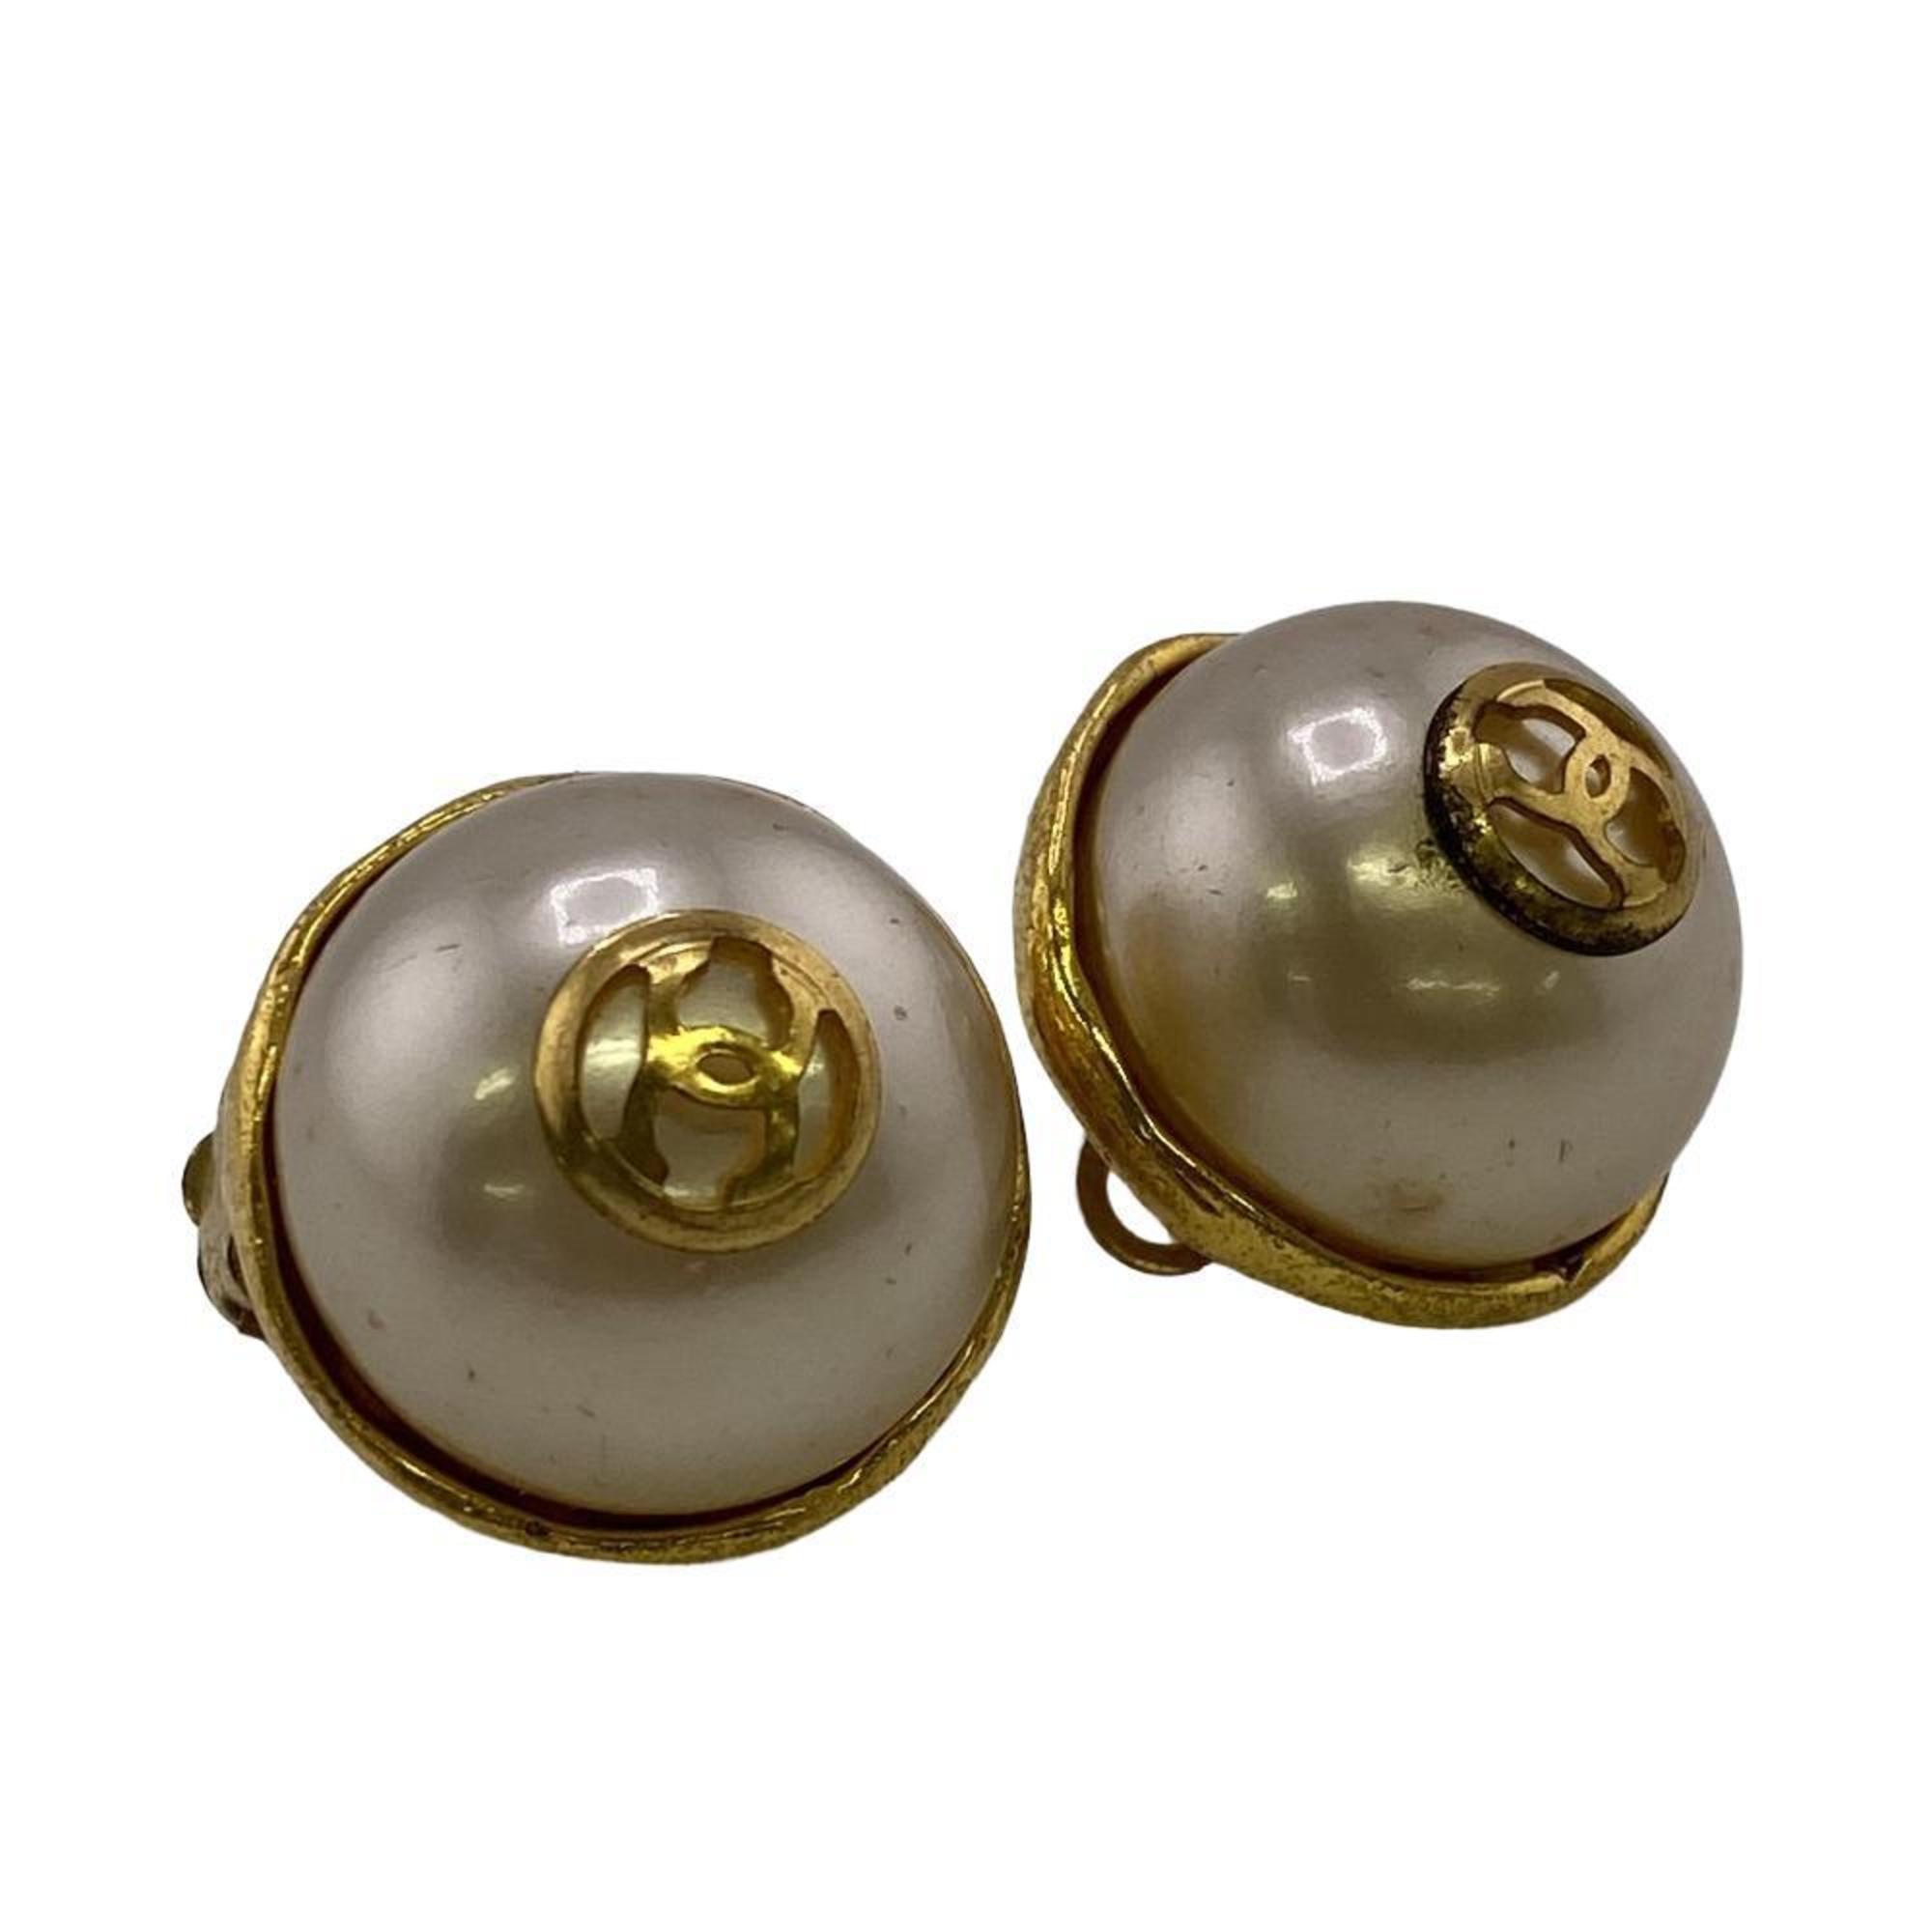 CHANEL 28 Pearl Coco Mark Earrings Gold Ladies